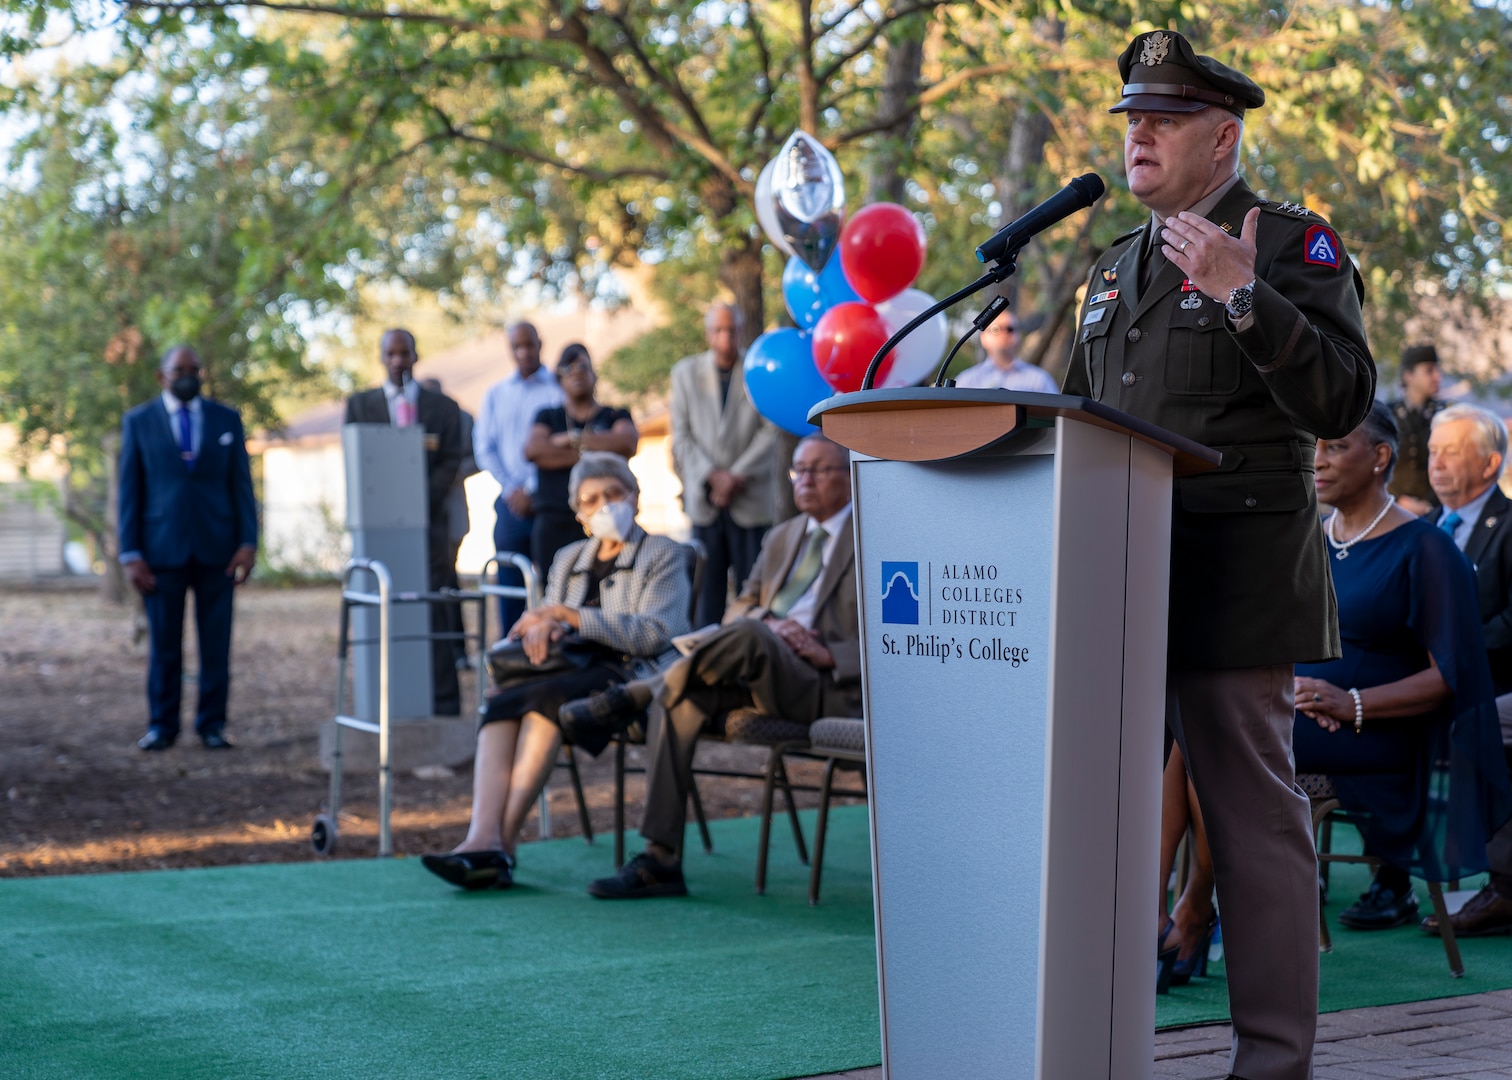 U.S. Army Lt. Gen. John Evans, commanding general of U.S. Army North, speaks during St. Philip’s College Col. Burley Oak Tree Dedication Ceremony, held on the St. Philip’s College’s campus, August 18, 2022. The 100-plus-year-old oak tree is part of the Burley homestead of the late retired U.S. Army Col. Roy W. Burley, Sr., for many generations. The tree now resides on the college campus with a plaque to share with future generations the legacy of “The Colonel”. (U.S. Army Photo by Bethany L. Huff)